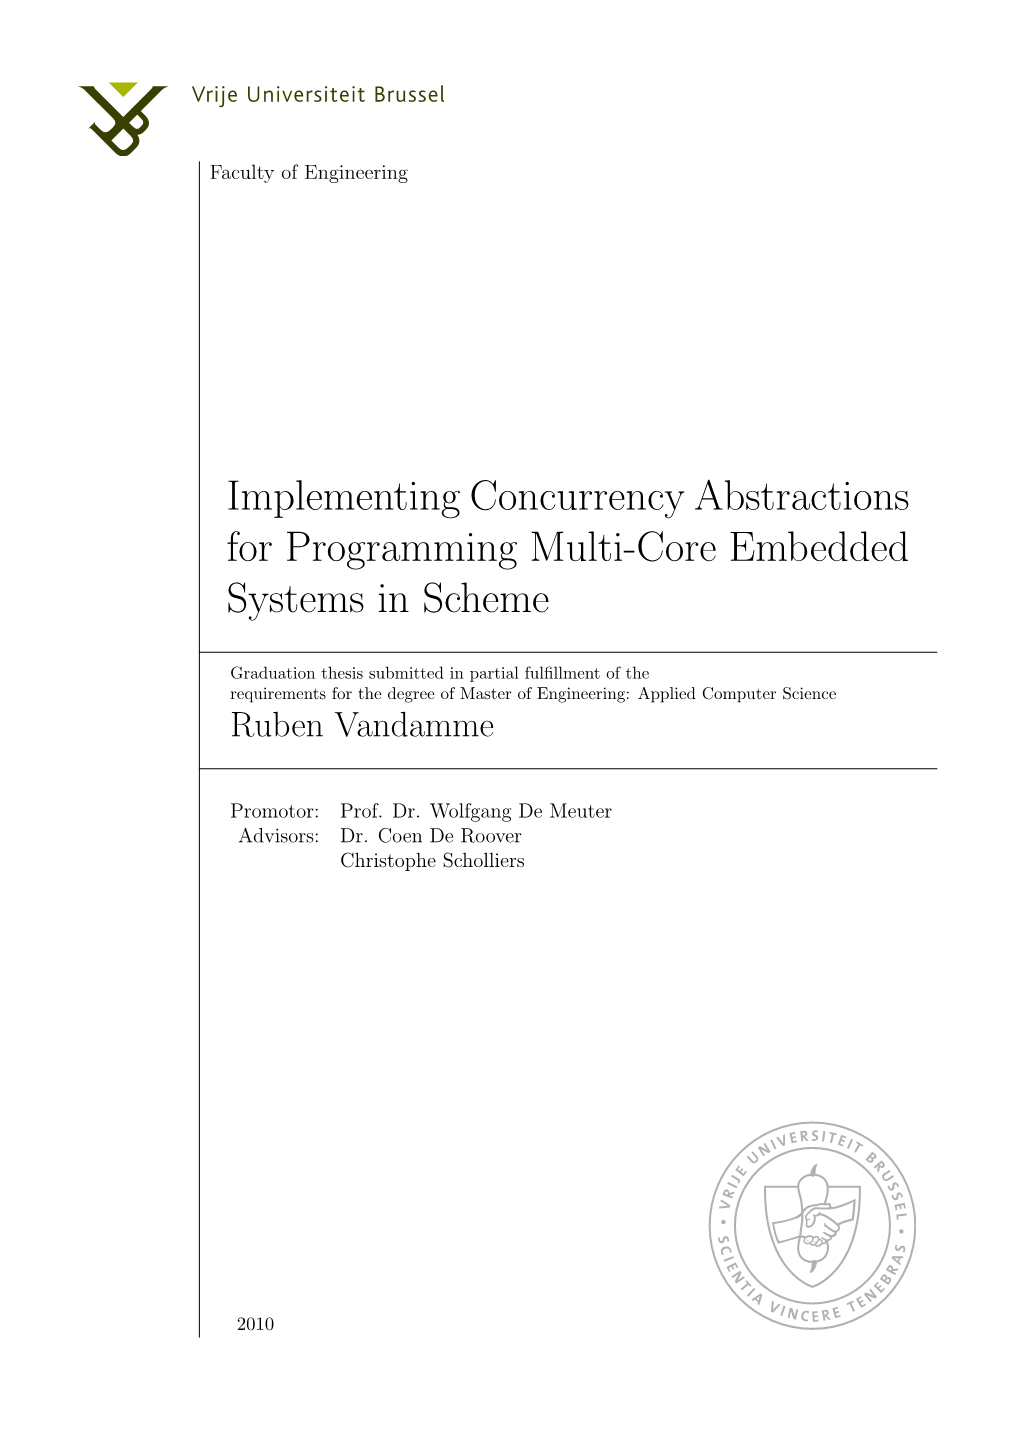 Implementing Concurrency Abstractions for Programming Multi-Core Embedded Systems in Scheme